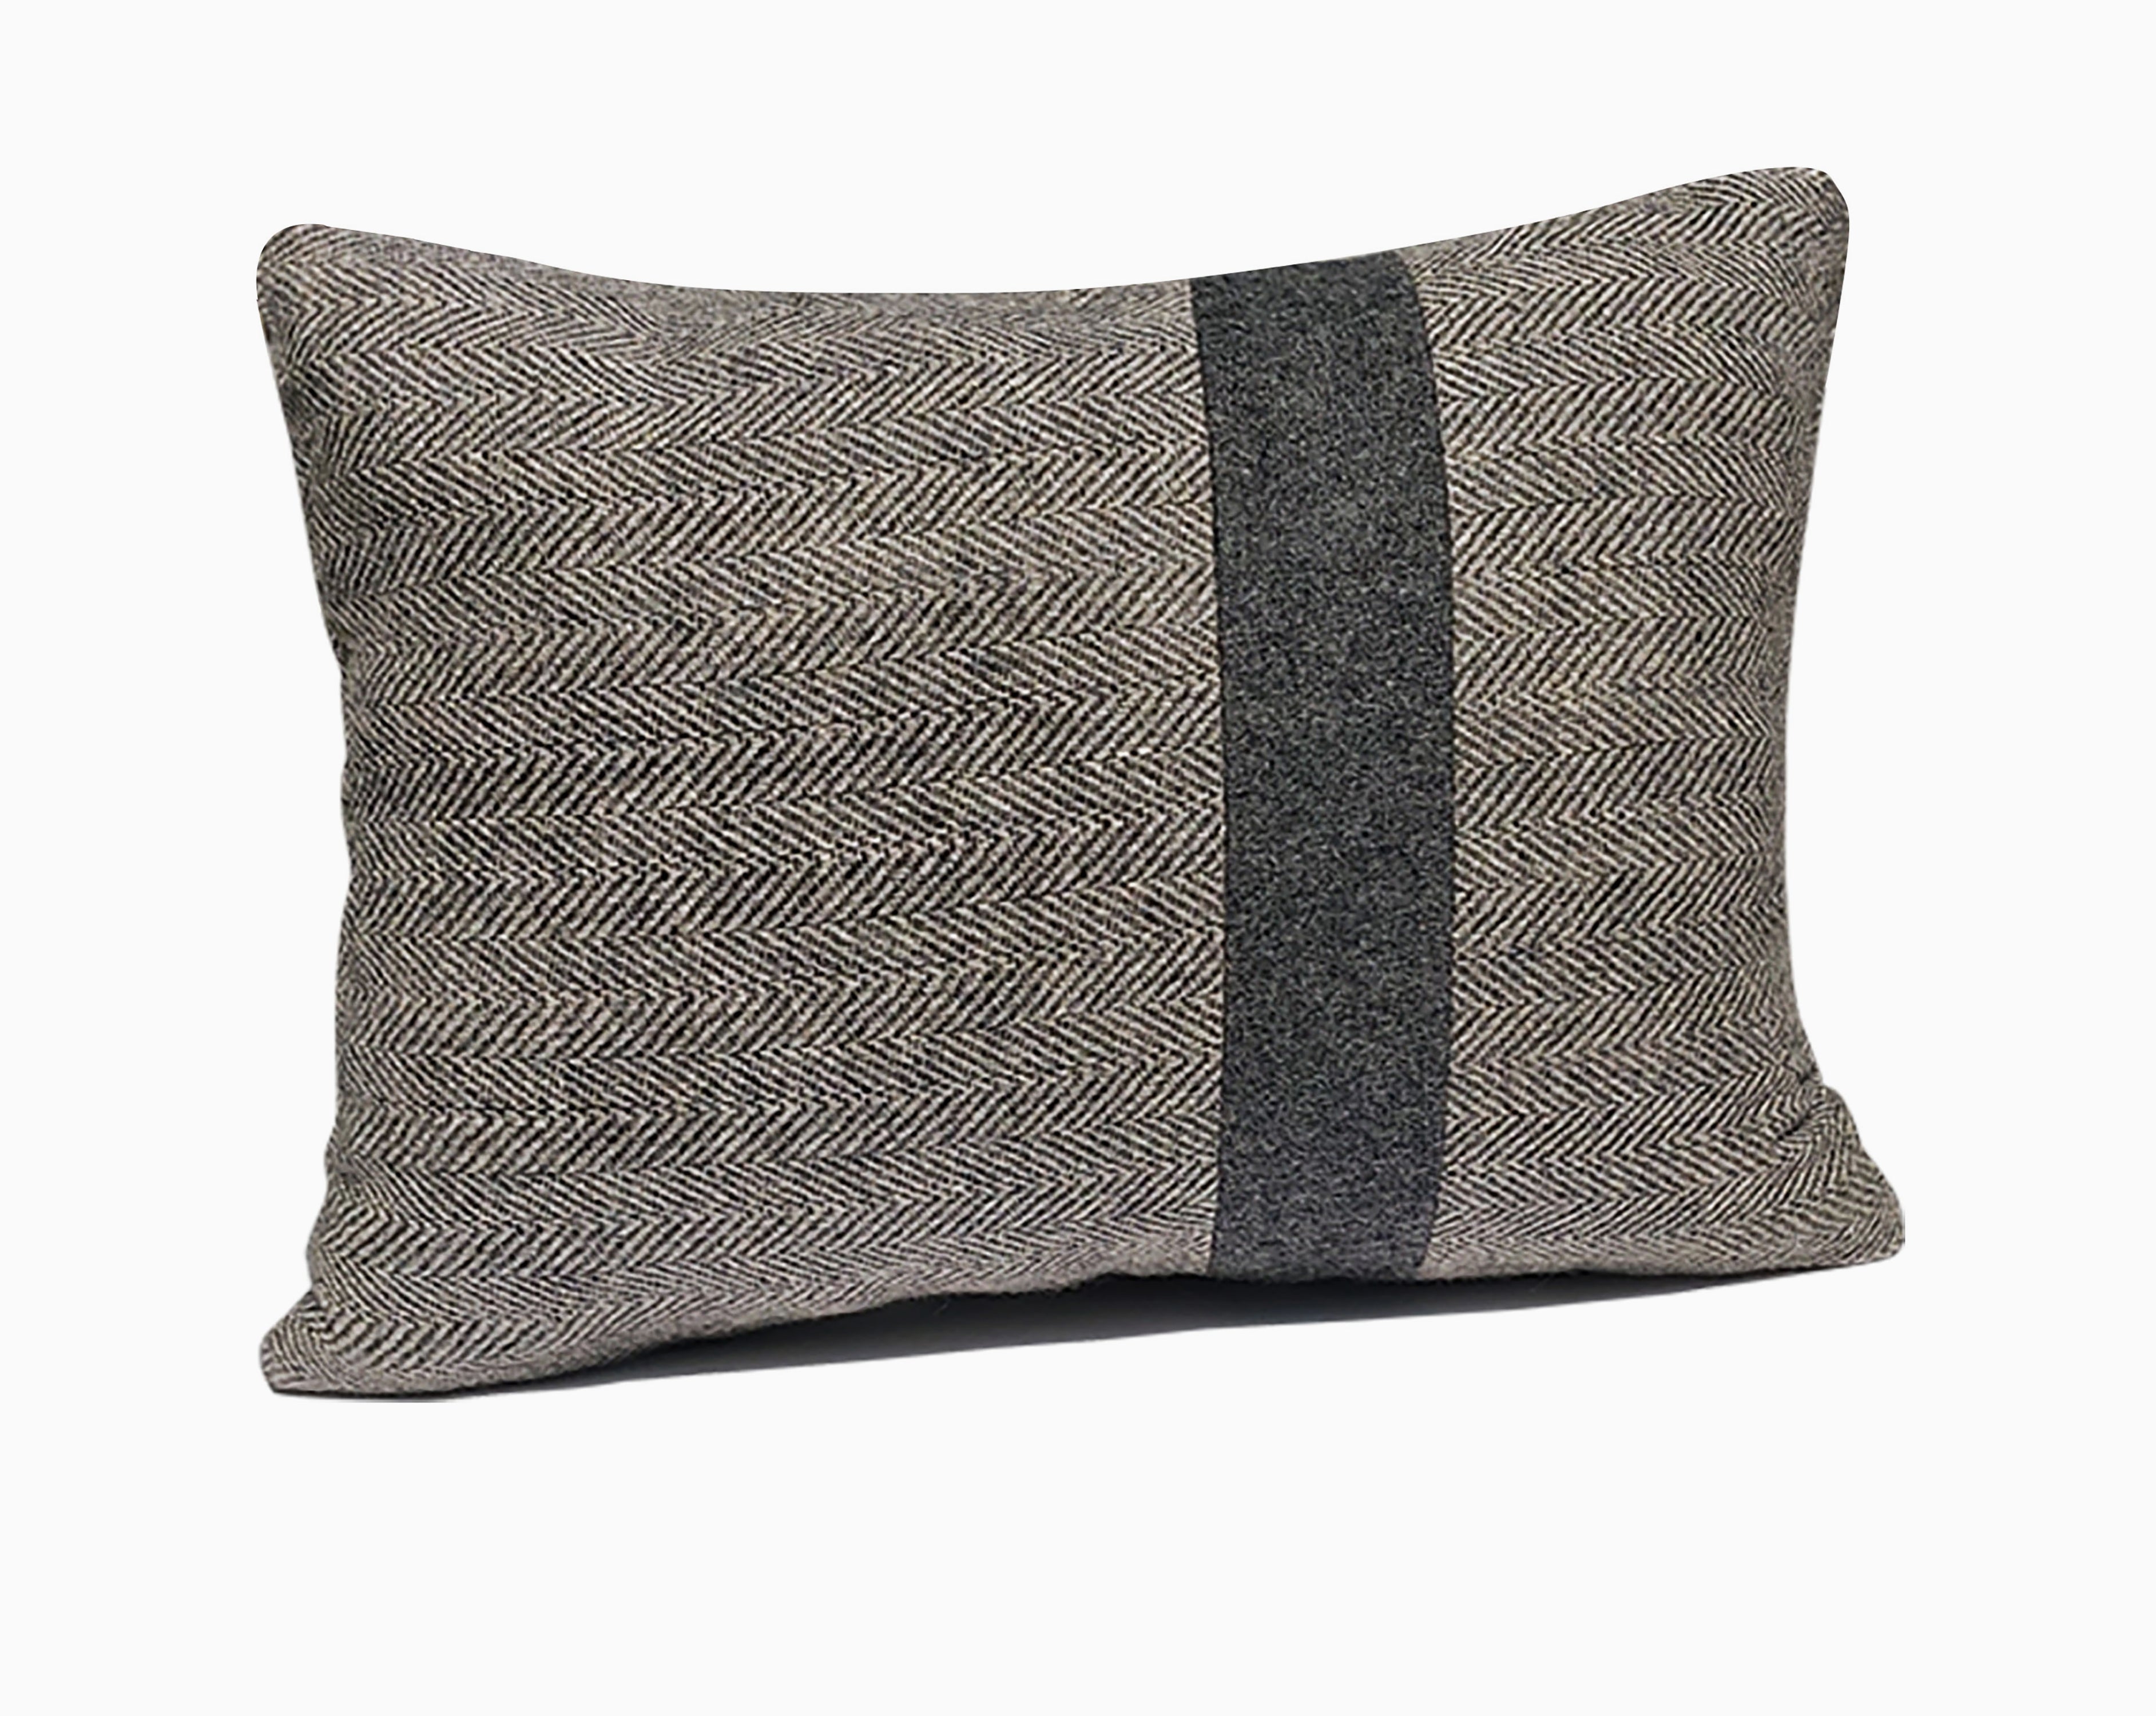 Amore Beaute lumbar pillow can work well with various decor styles - modern, contemporary, minimalist in a man cave, dorm room, kids room, bedroom or living room.